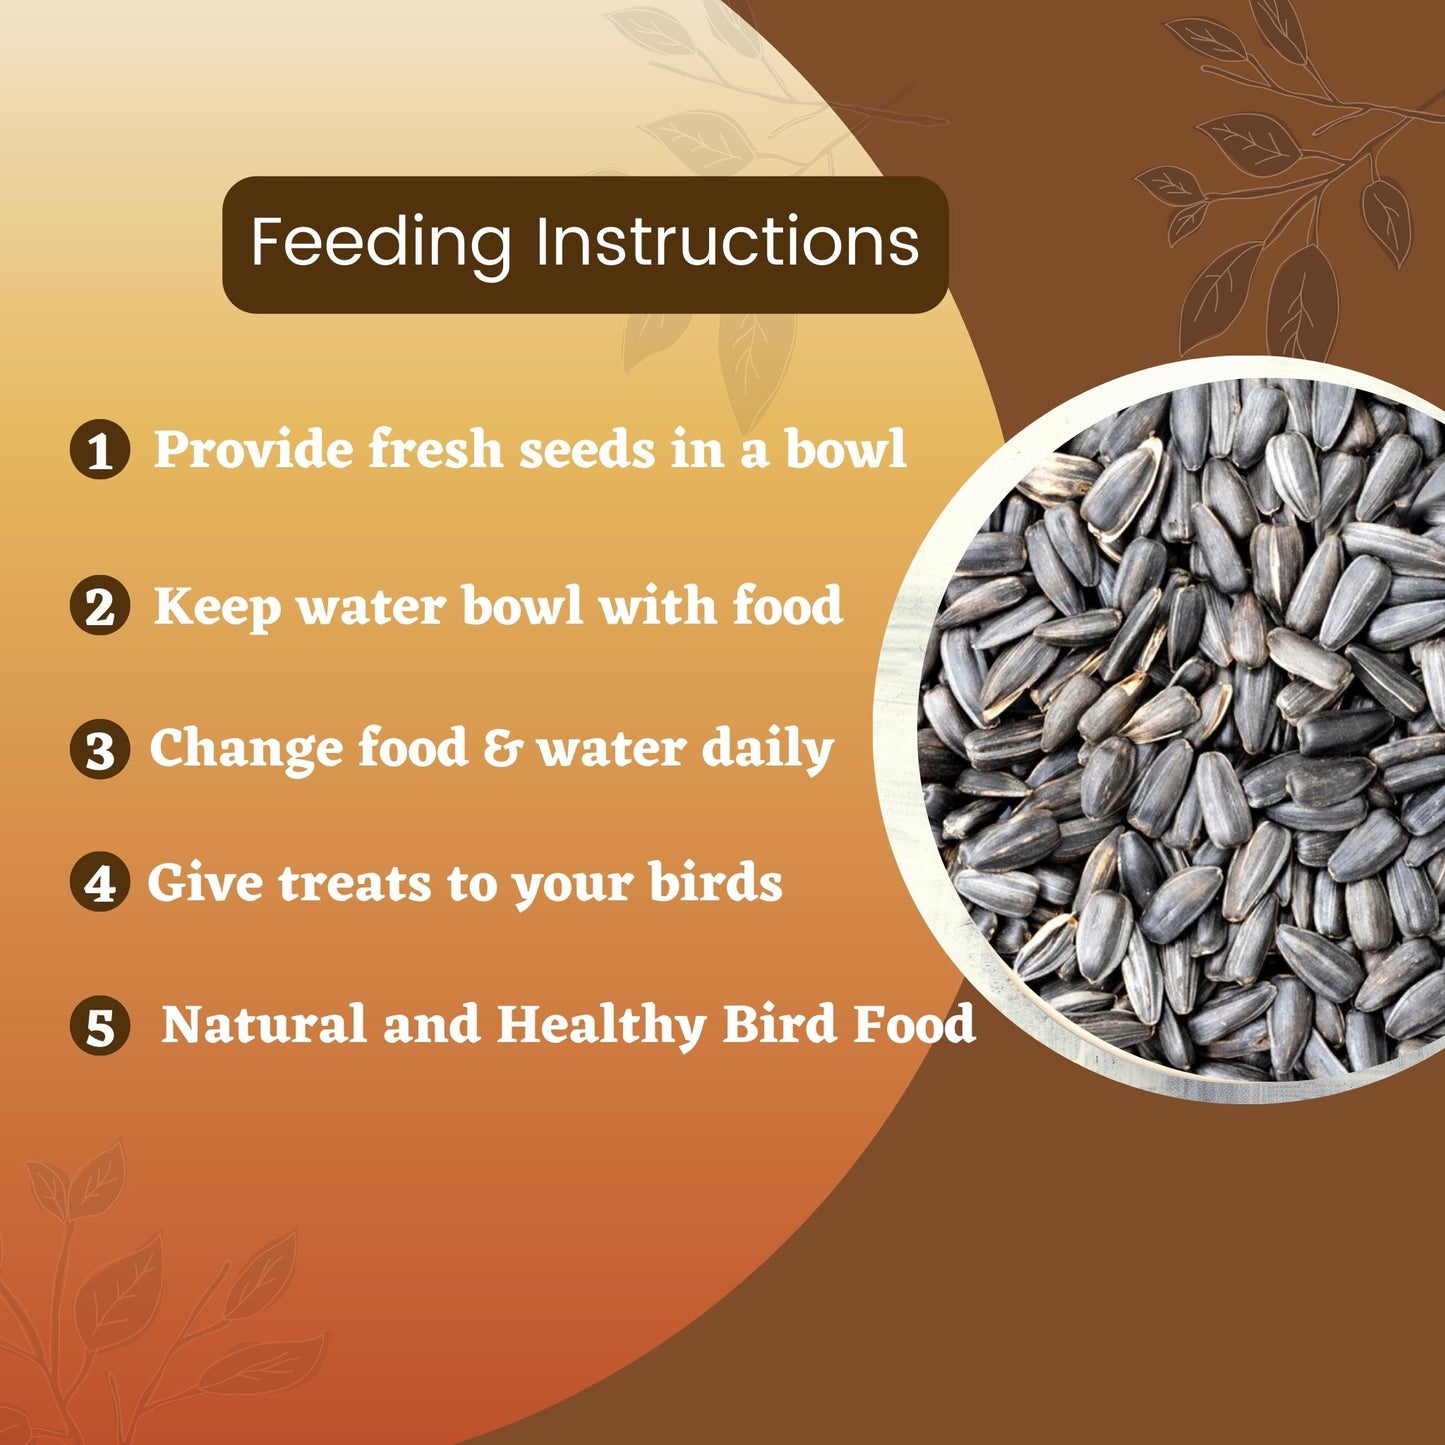 Foodie Puppies Sunflower Seeds - 1Kg | Suitable for All Types of Birds